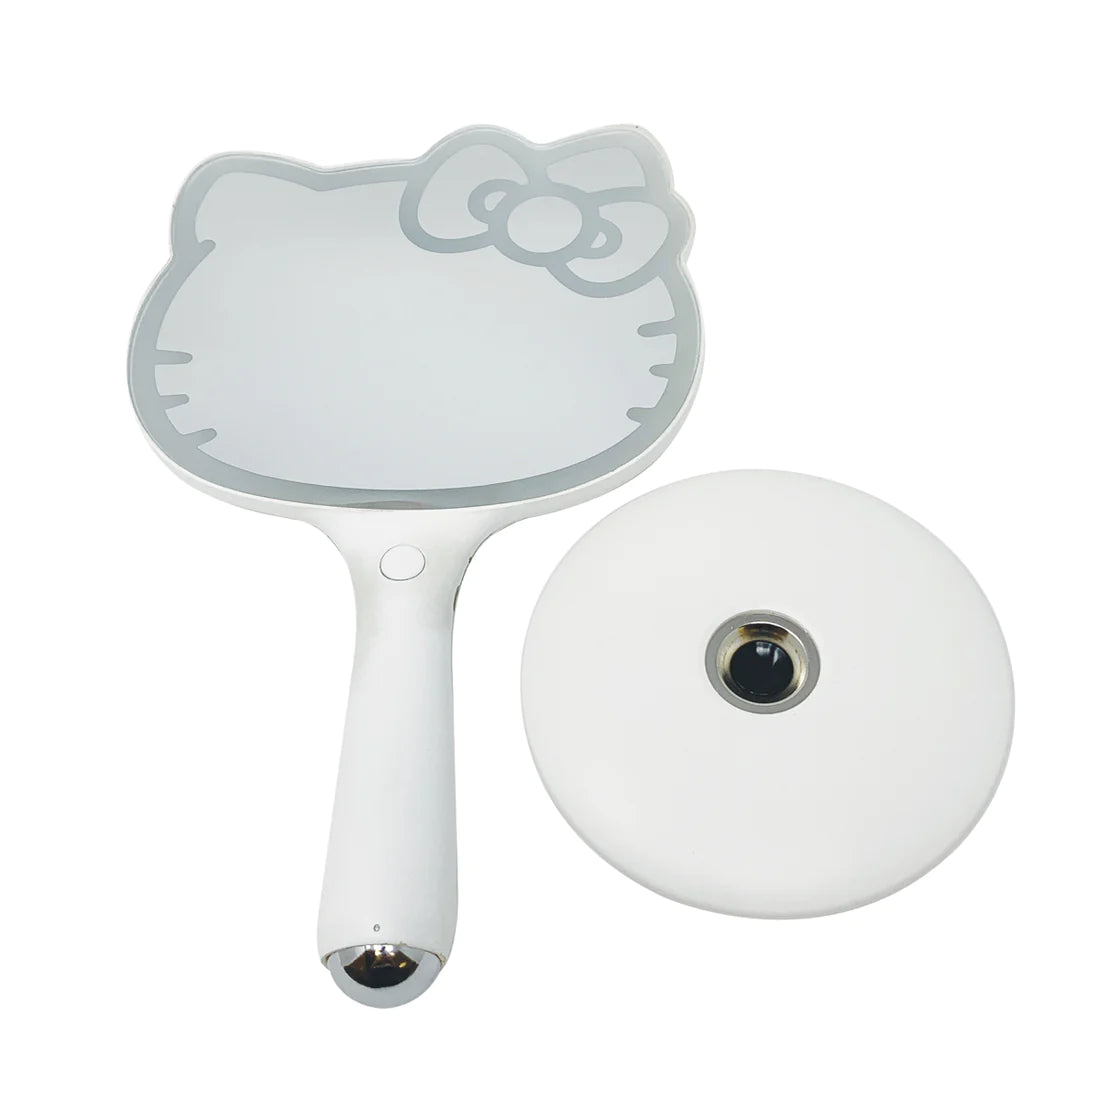 Impressions Vanity - Hello Kitty LED Handheld Makeup Mirror With Standing Base